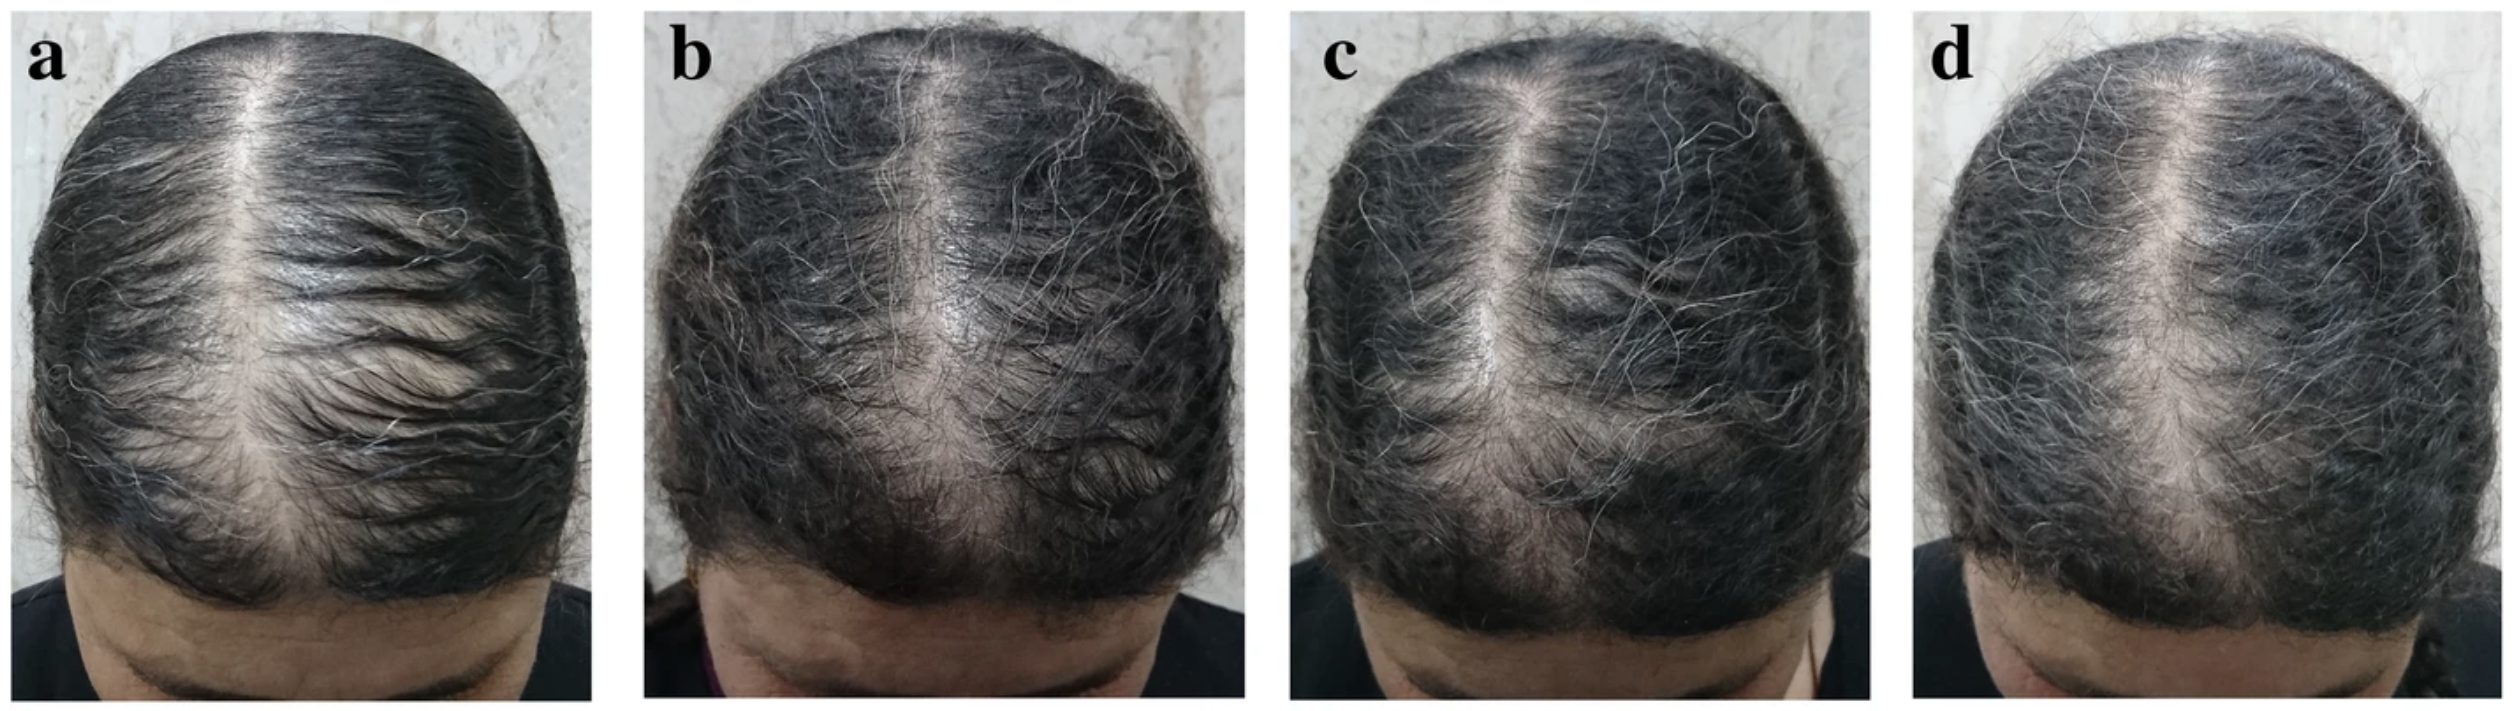 Improvement of thinning hair from androgenic alopecia due to the use of topical ketoconazole